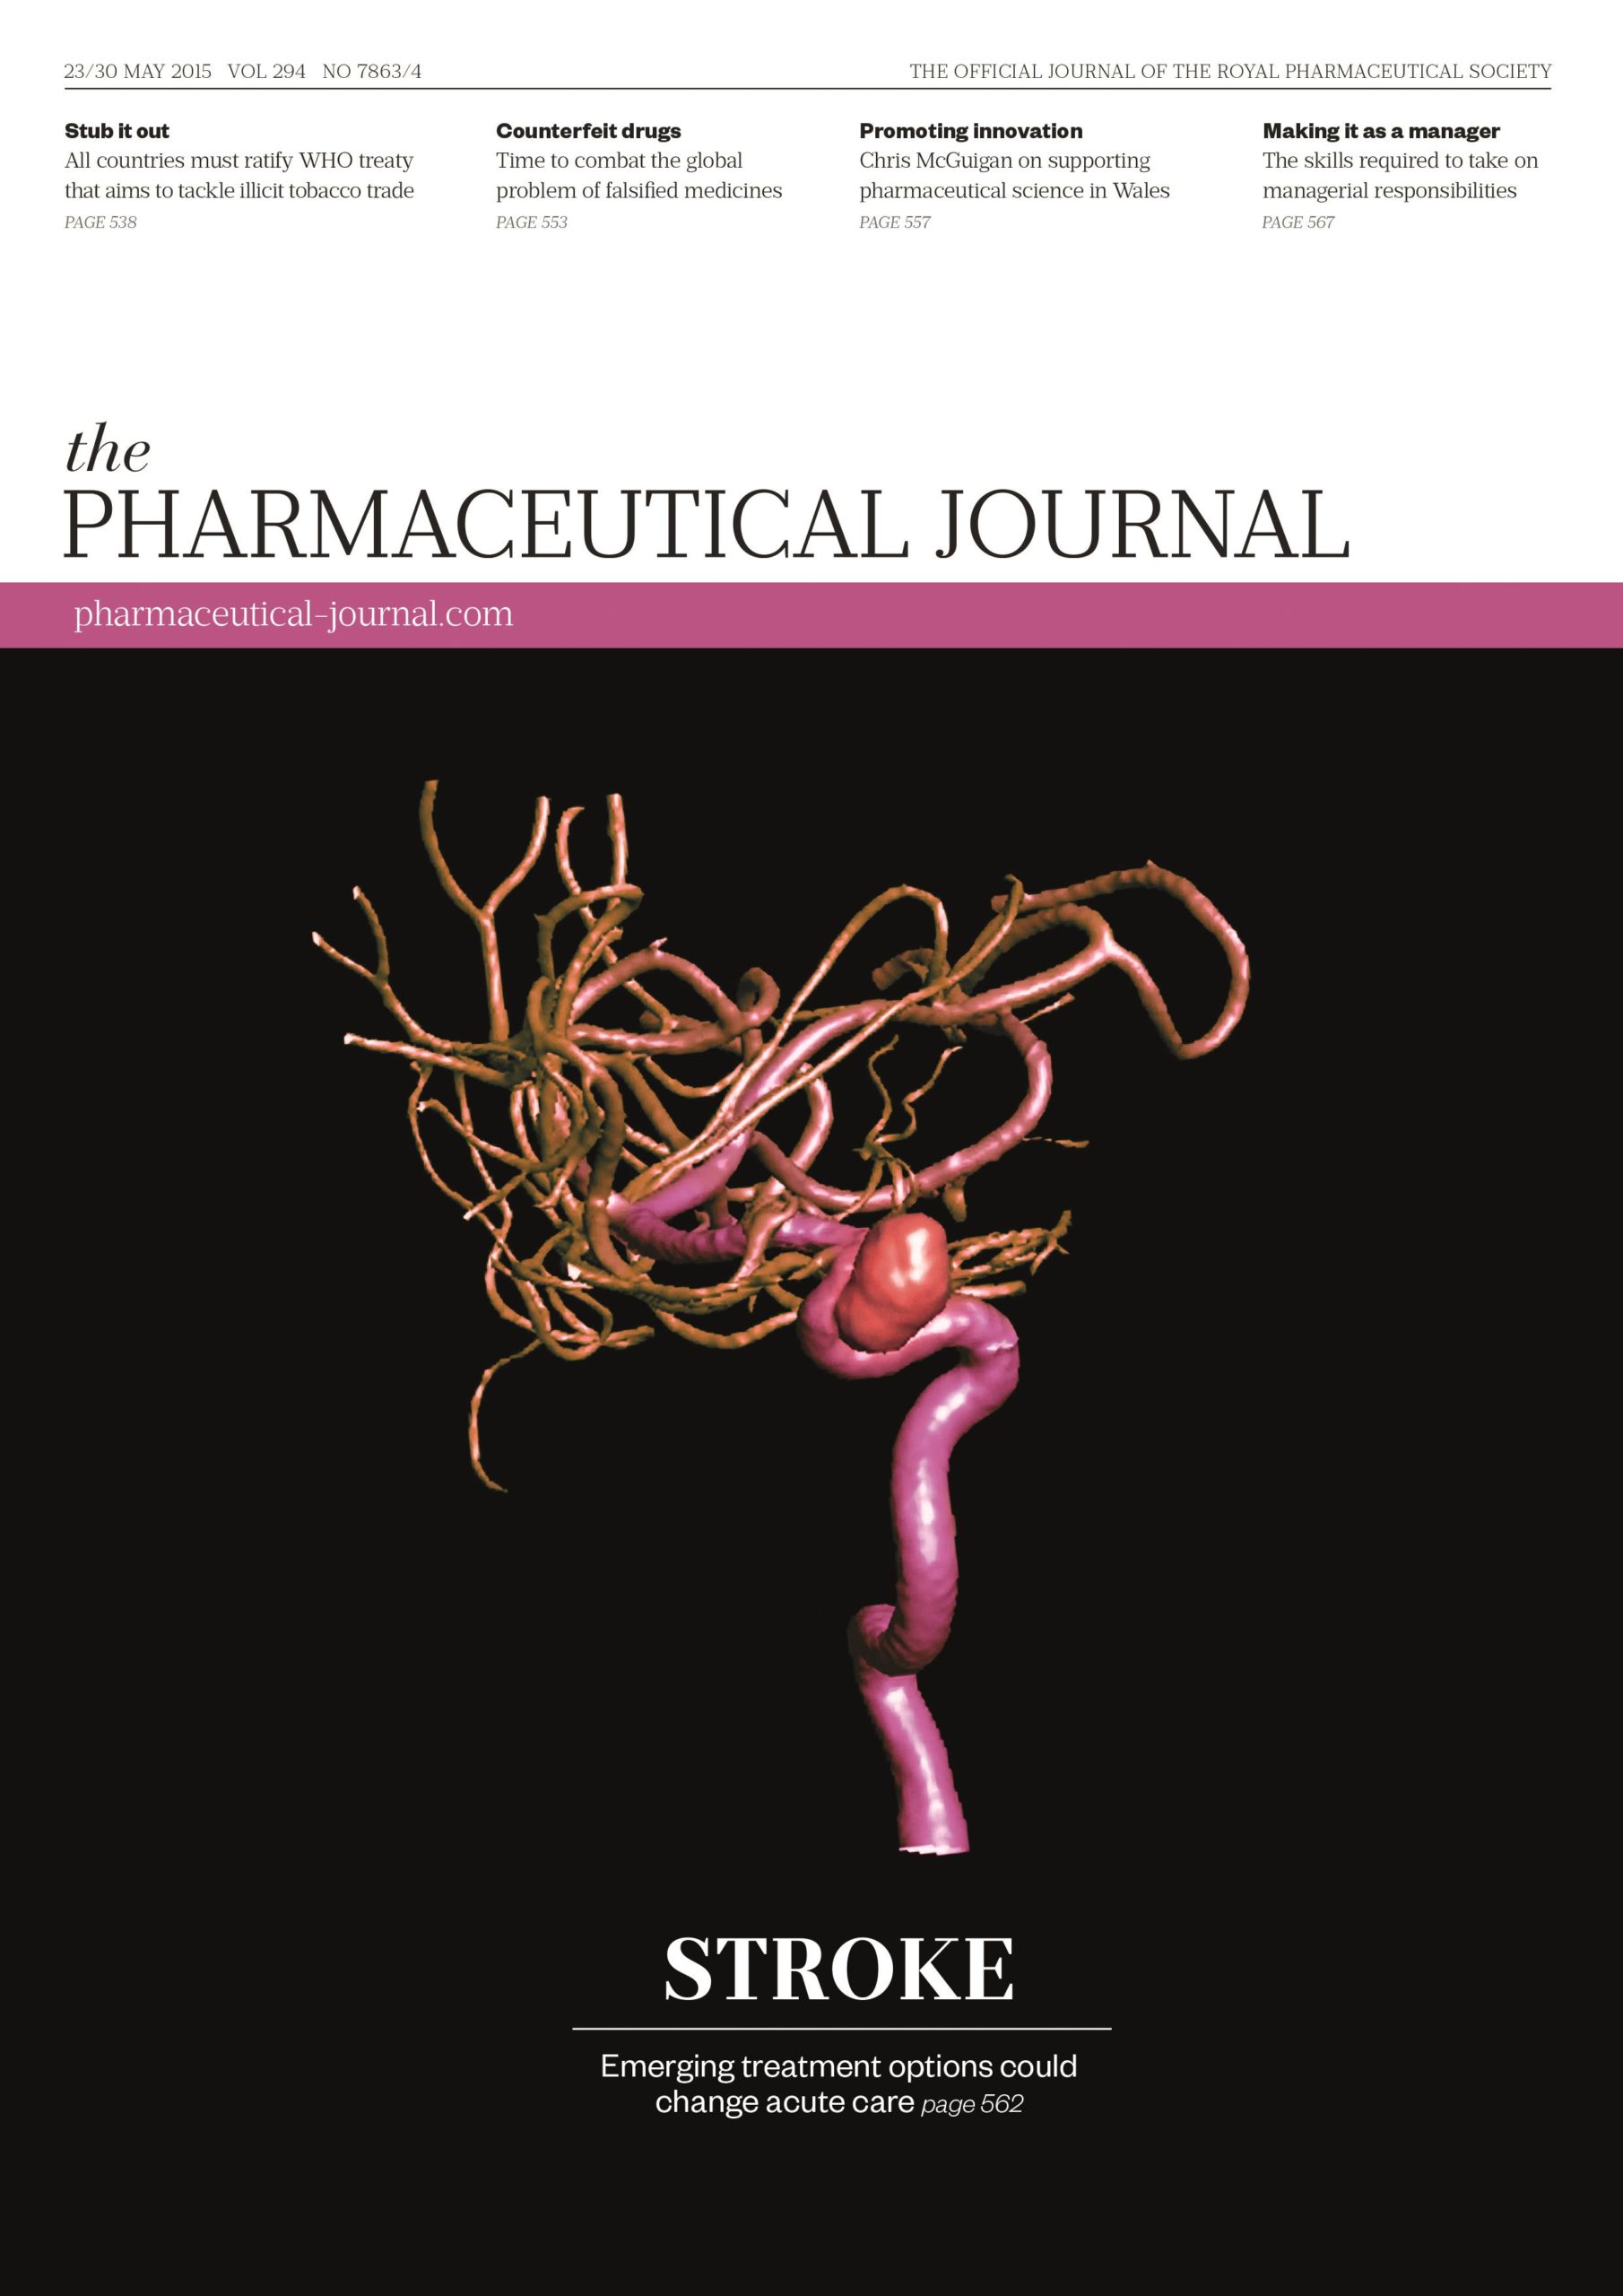 Publication issue cover for PJ, 23/30 May 2015, Vol 294, No 7863/4